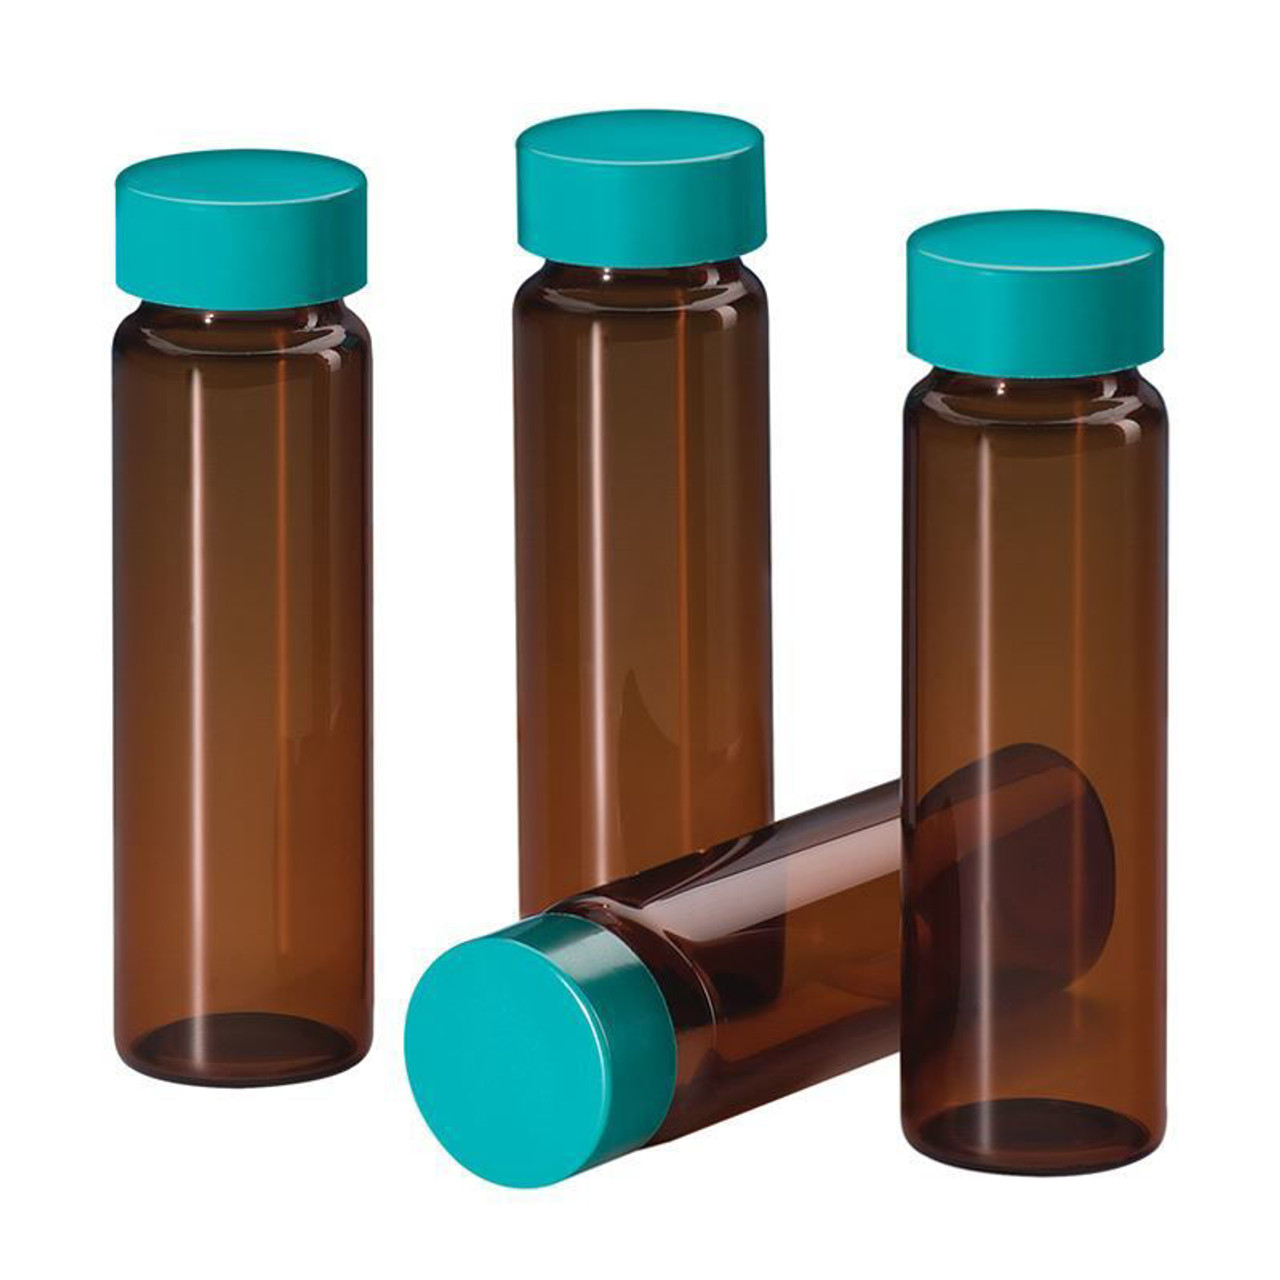 https://cdn11.bigcommerce.com/s-3yvzqa/images/stencil/1280x1280/products/206687/344148/0007750_sample-vials-amber-ptfe-lined-caps-type-1-borosilicate-glass__64412.1694552170.jpg?c=2